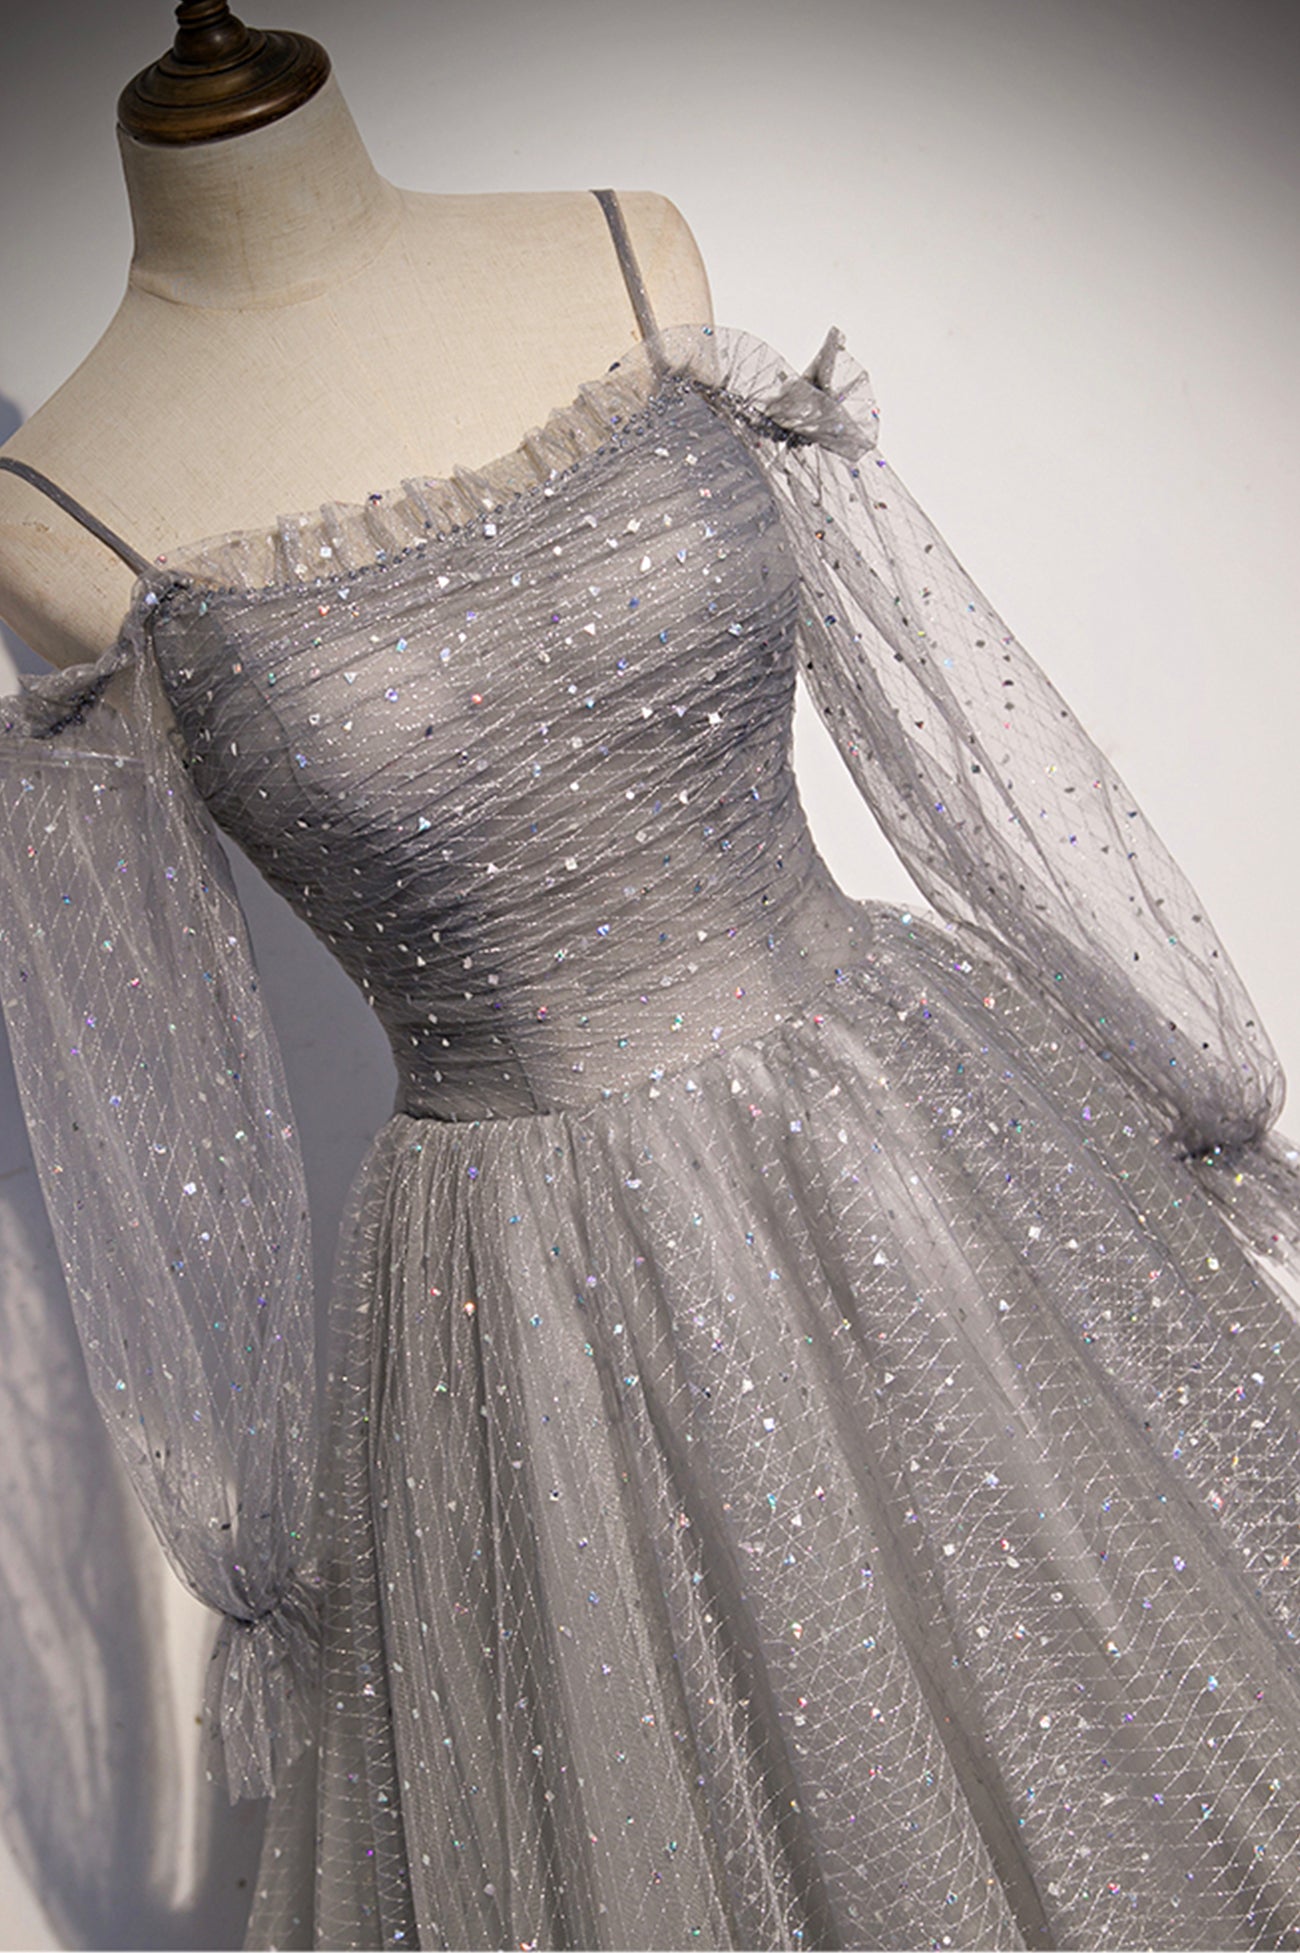 Gray Tulle Long Sleeve A-Line Prom Dress, Spaghetti Straps Formal Evening Dress